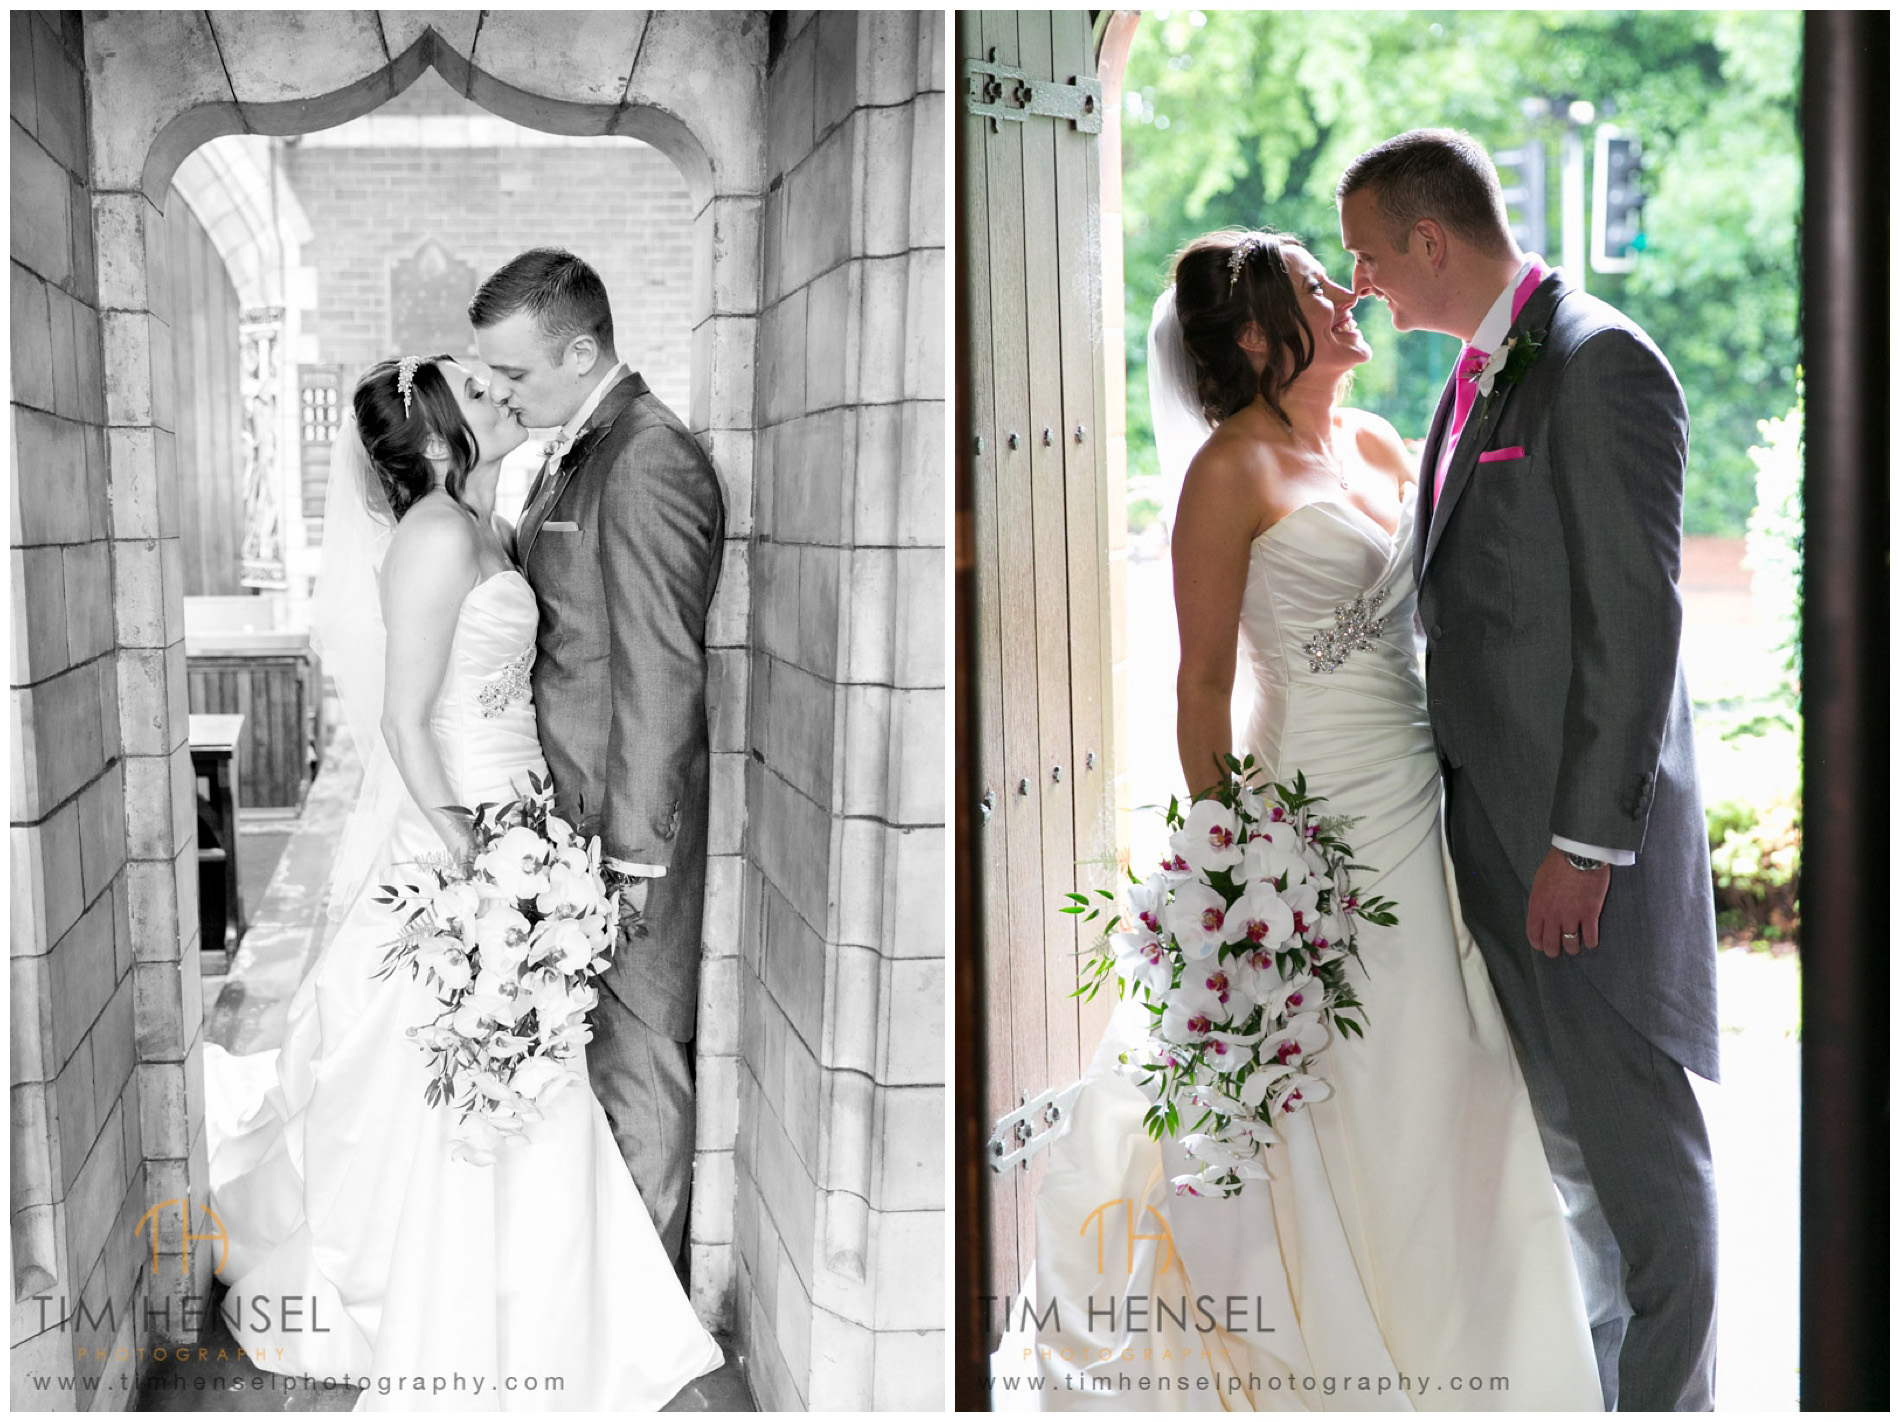 Relaxed wedding photography in Cheshire